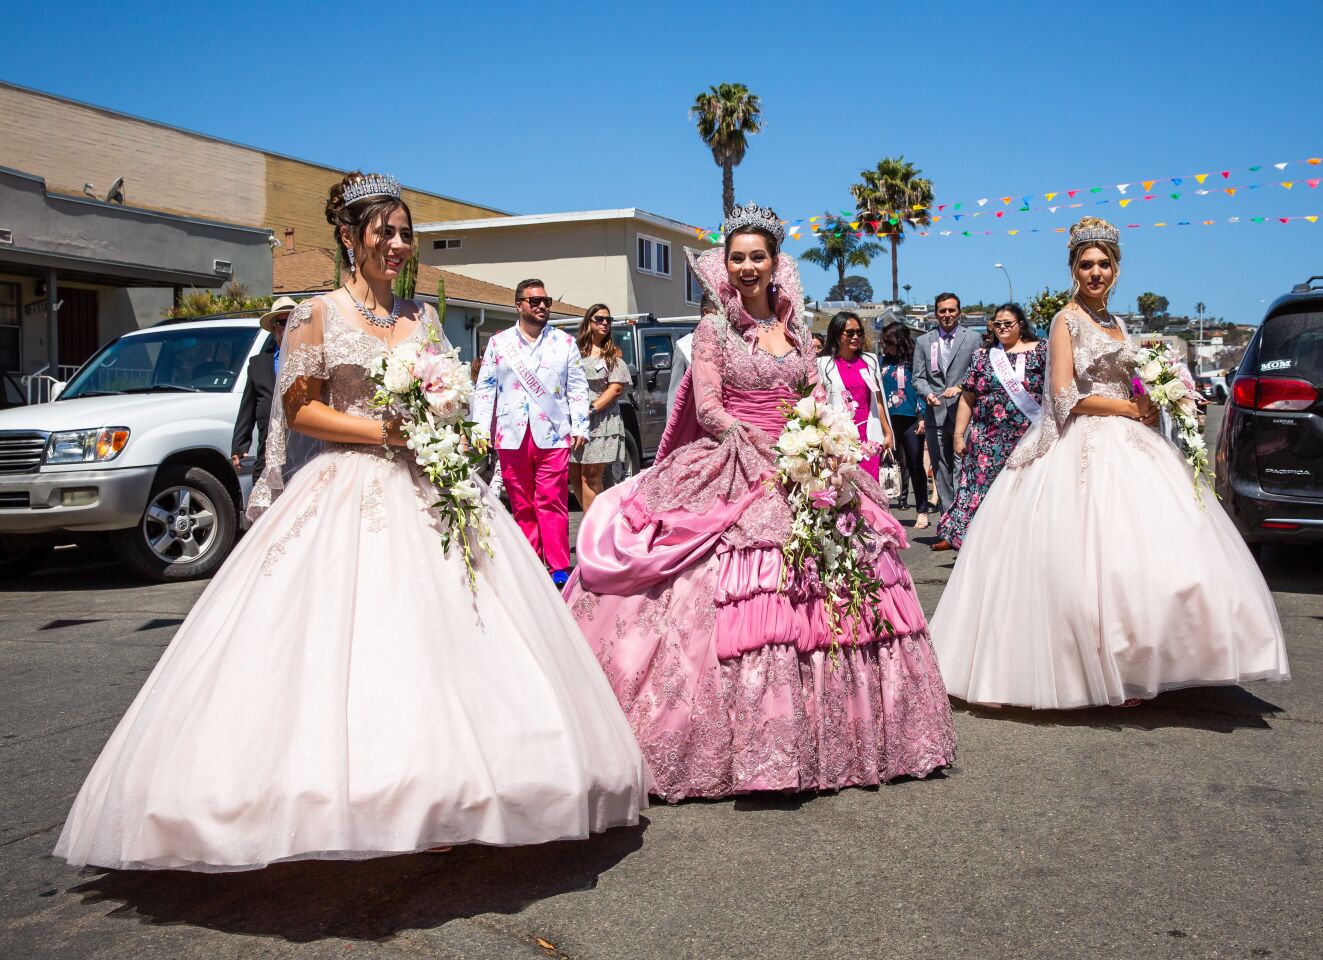 Festa Queen Jaquelyn Neves (center) and her court, Victoria Jorge (left) and Berlyn Balelo arrive for Festa do Espirito Santo (Feast of the Holy Spirit) ceremonies May 23 at the United Portuguese Society of the Holy Spirit in Point Loma.